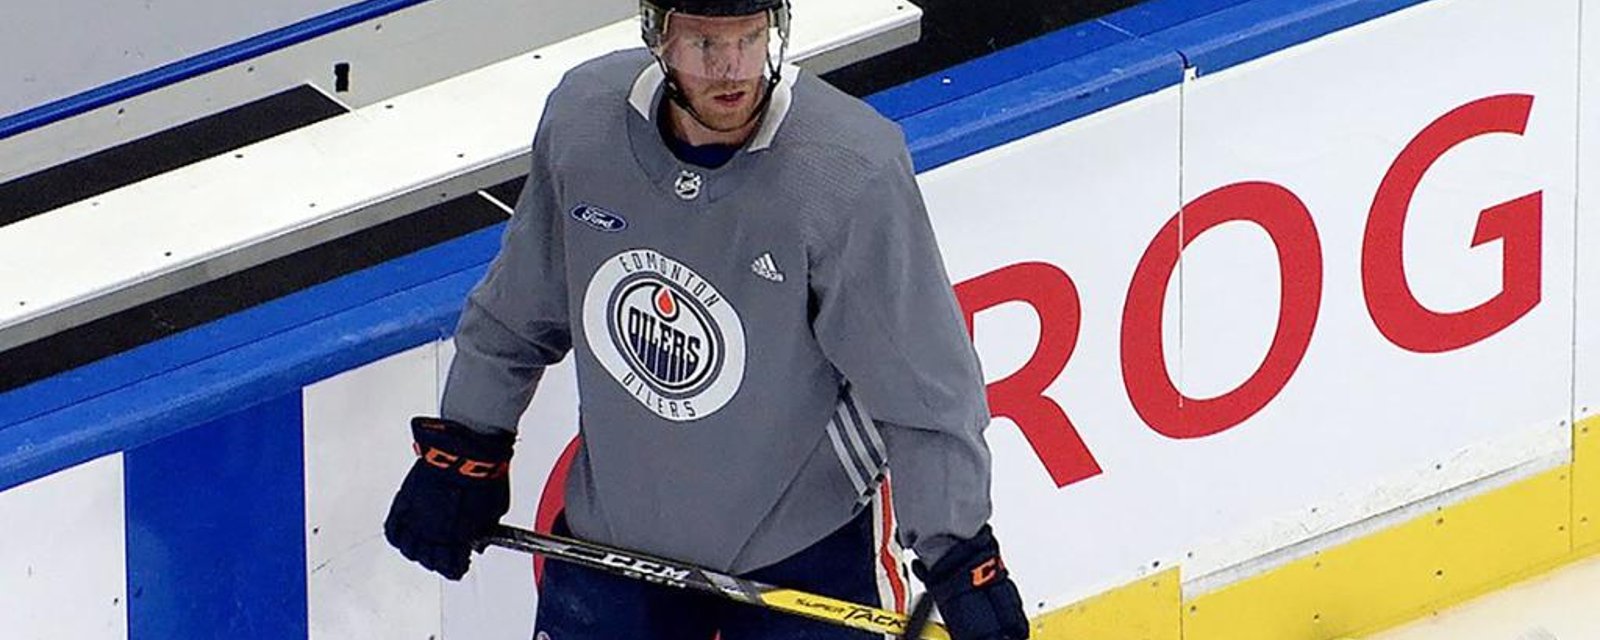 The truth comes out on Connor McDavid and injury reports